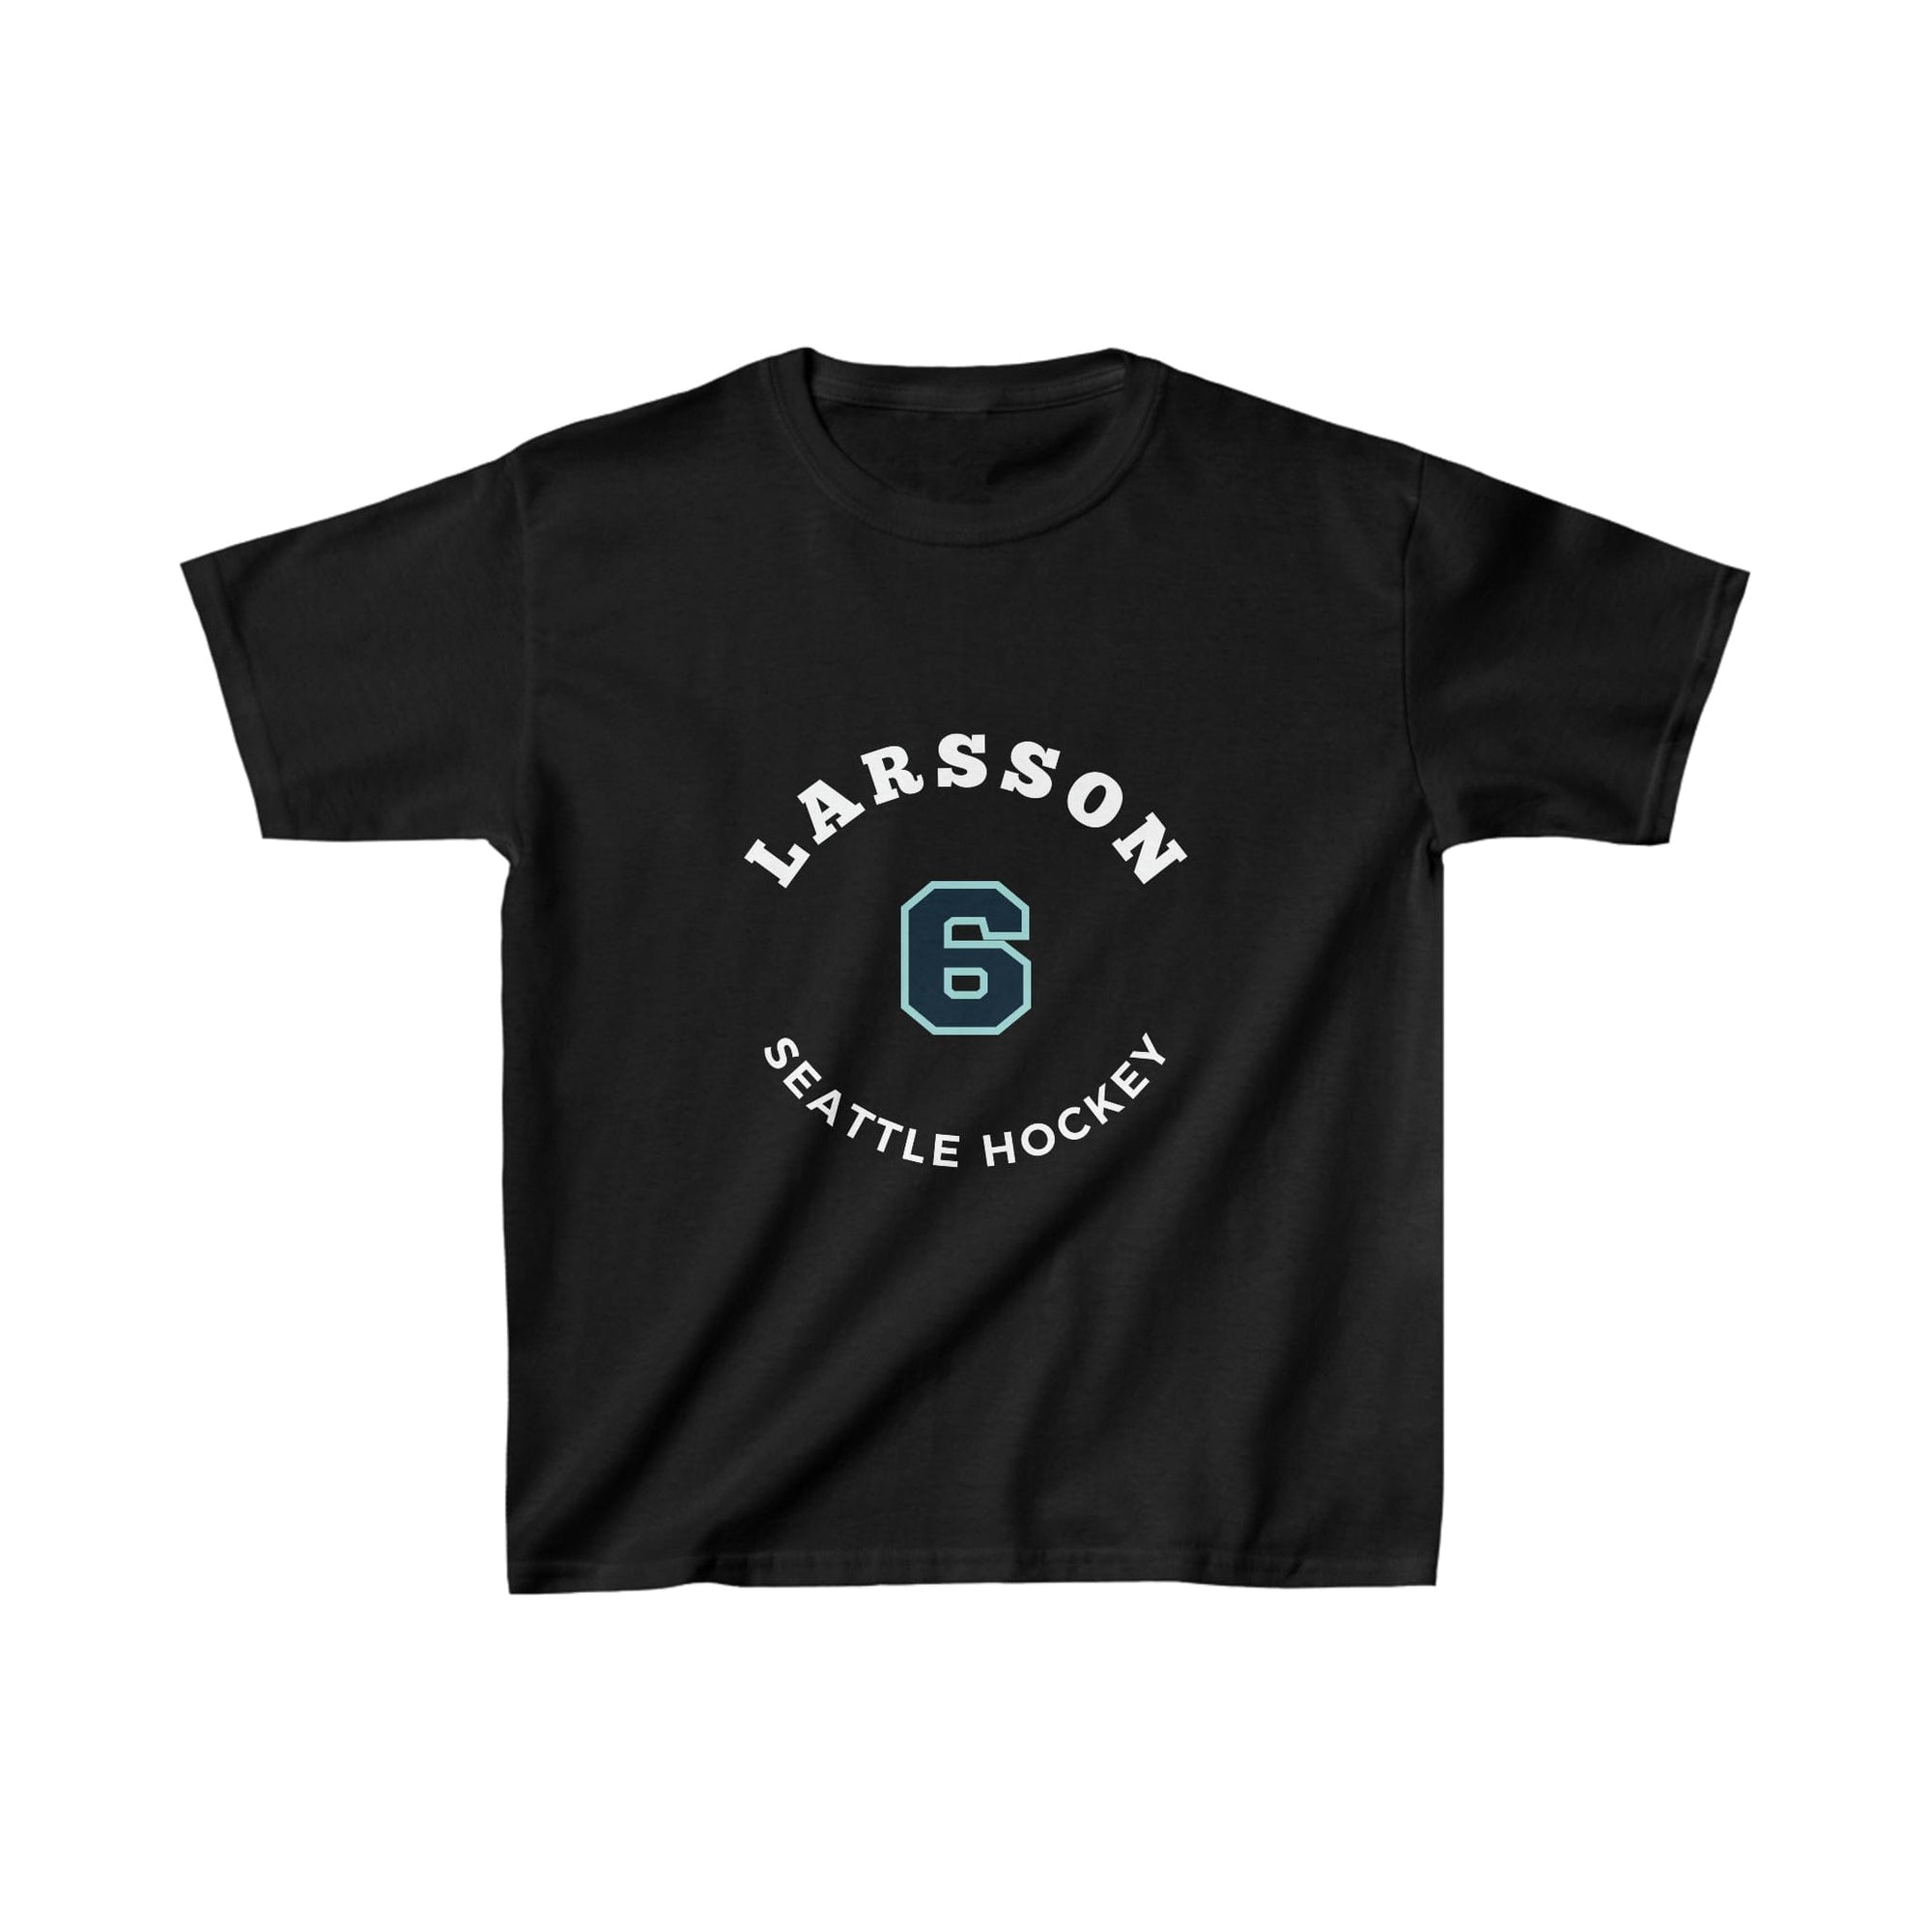 Kids clothes Larsson 6 Seattle Hockey Number Arch Design Kids Tee